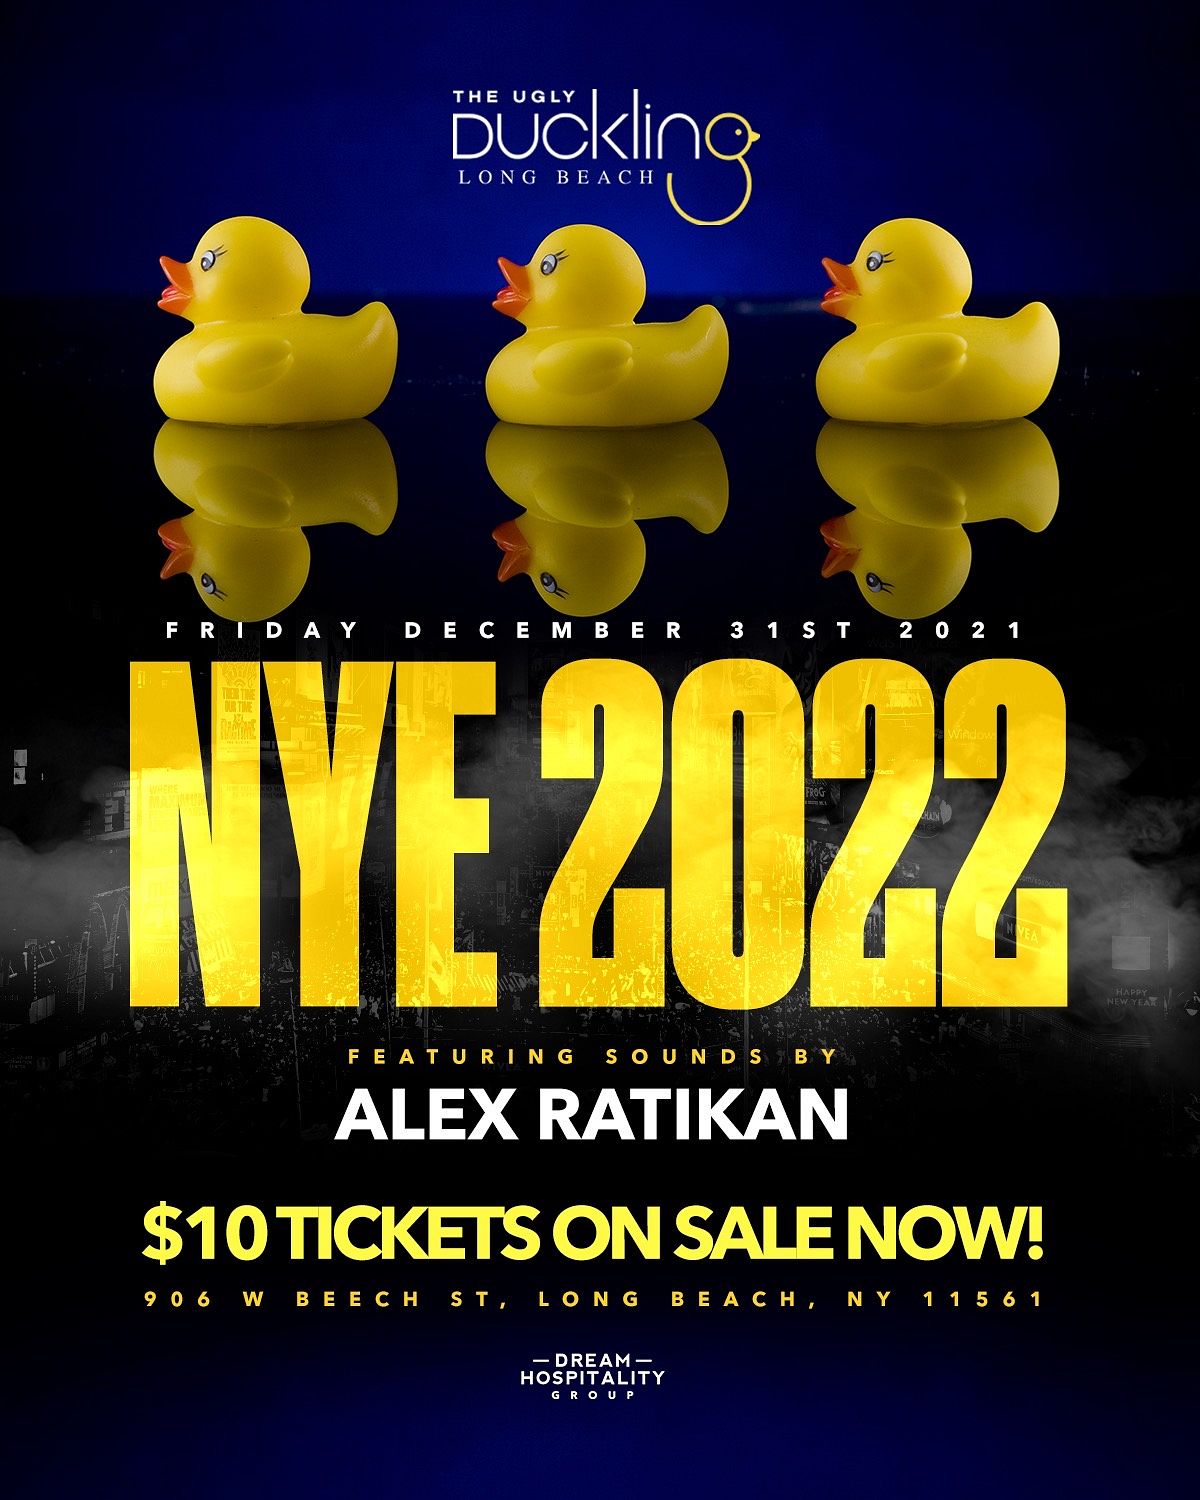 New Years Eve Ugly Duckling Li Tickets At The Ugly Duckling In Long 